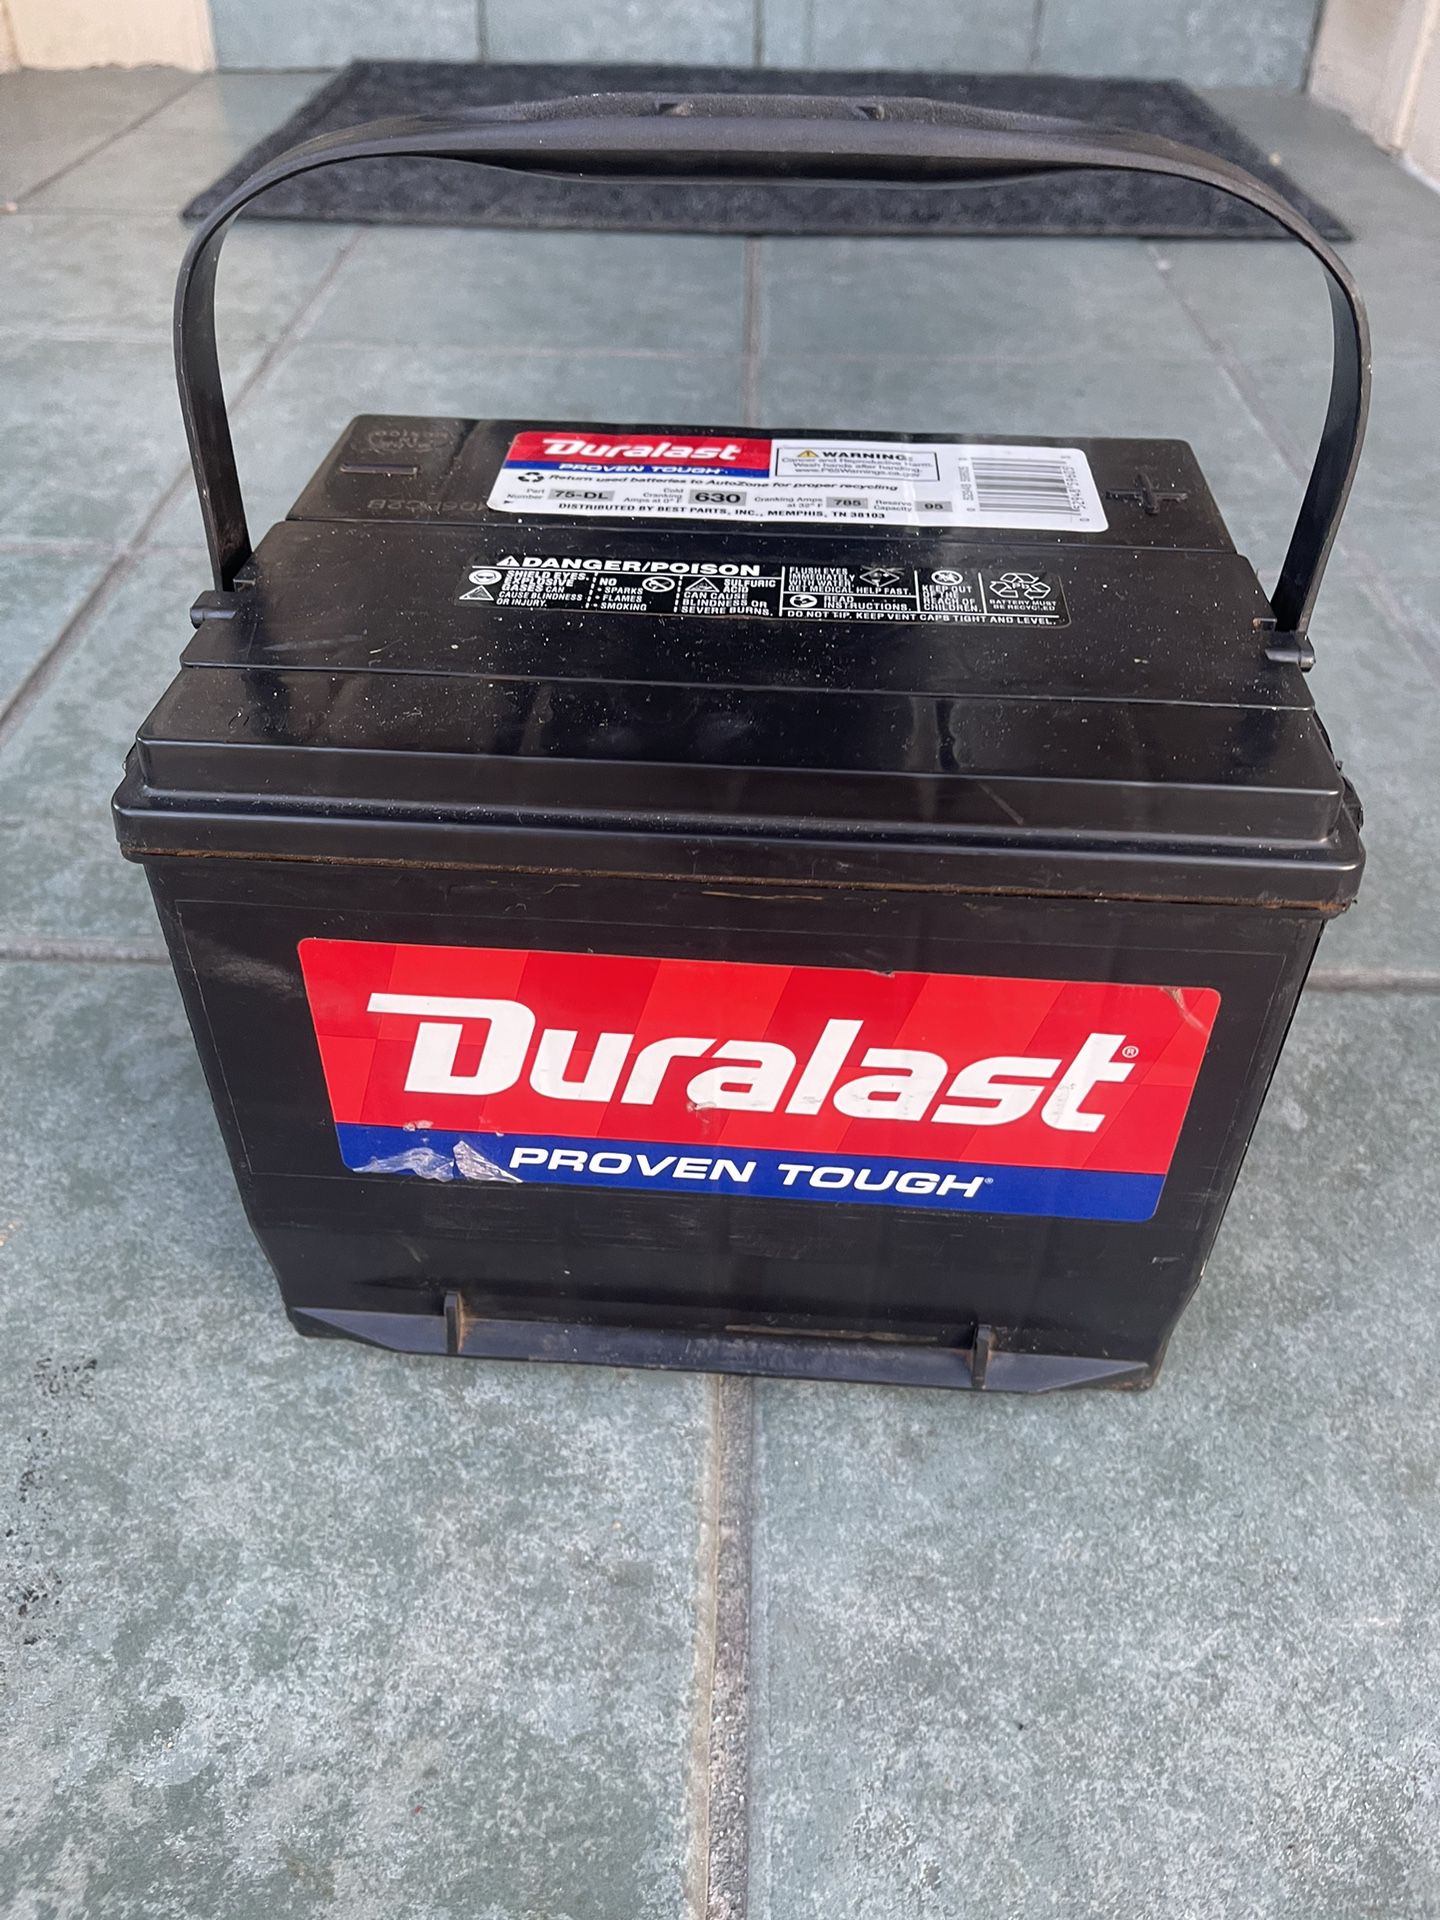 Chevy Truck Car Battery Size 75 $80 With Your Old Battery 